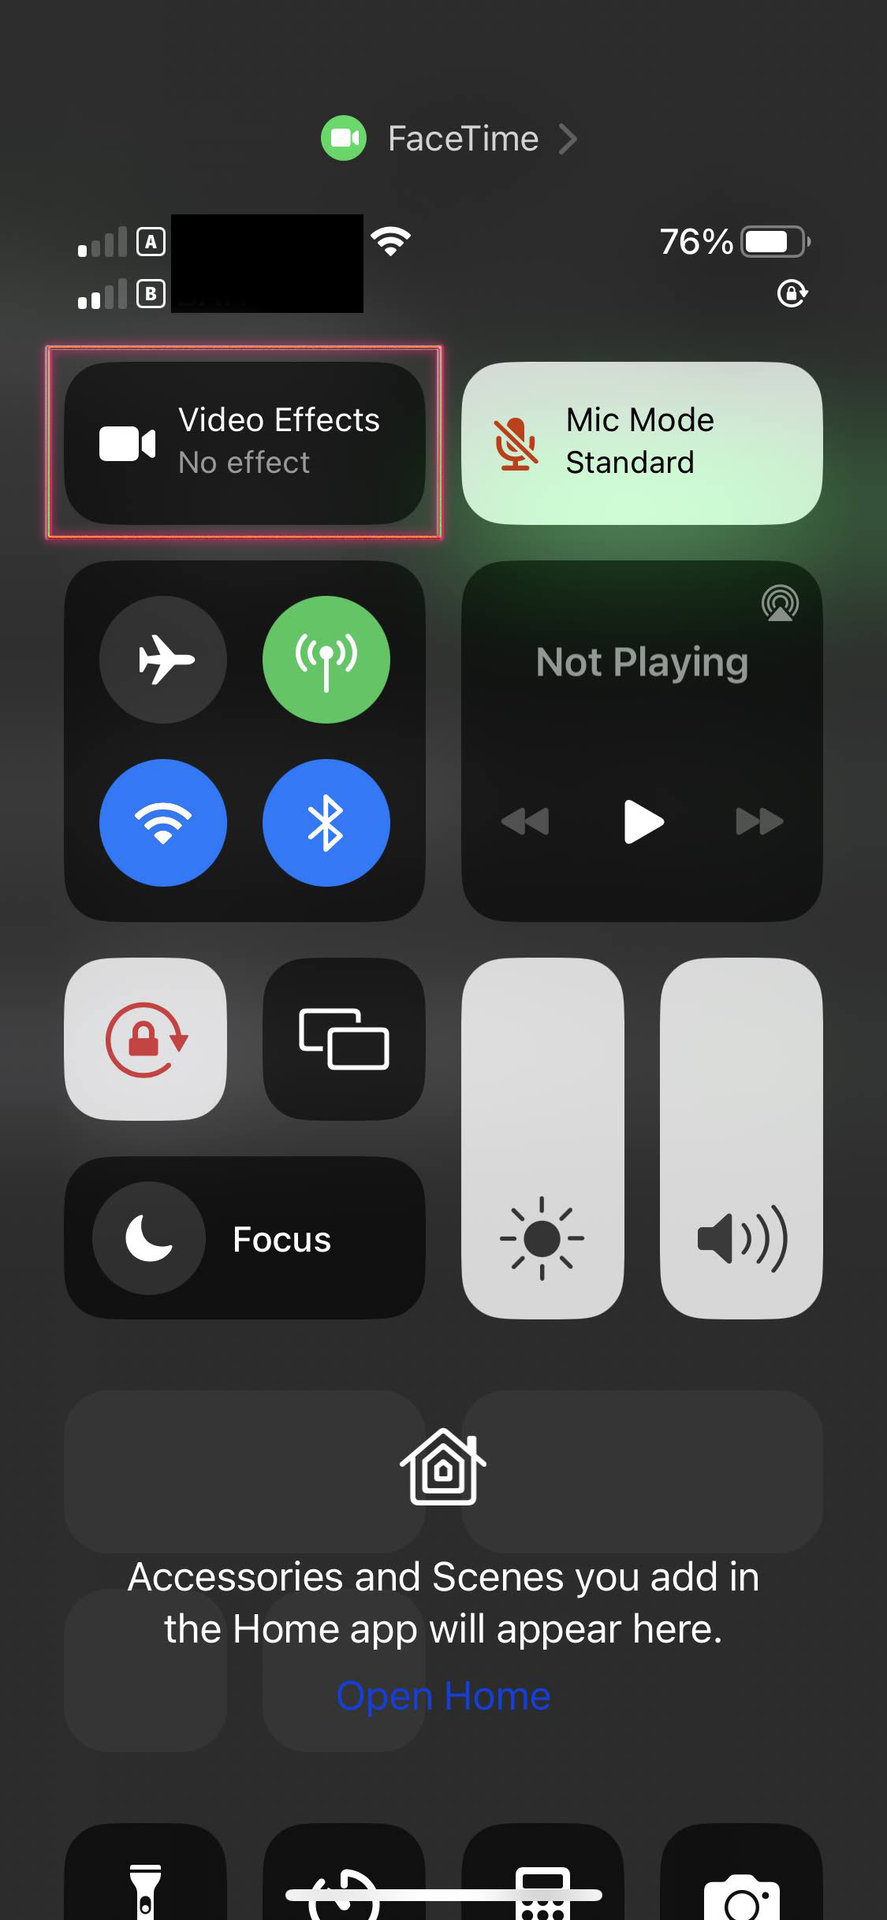 Turn on Facetime portrait mode from the Control Center 2